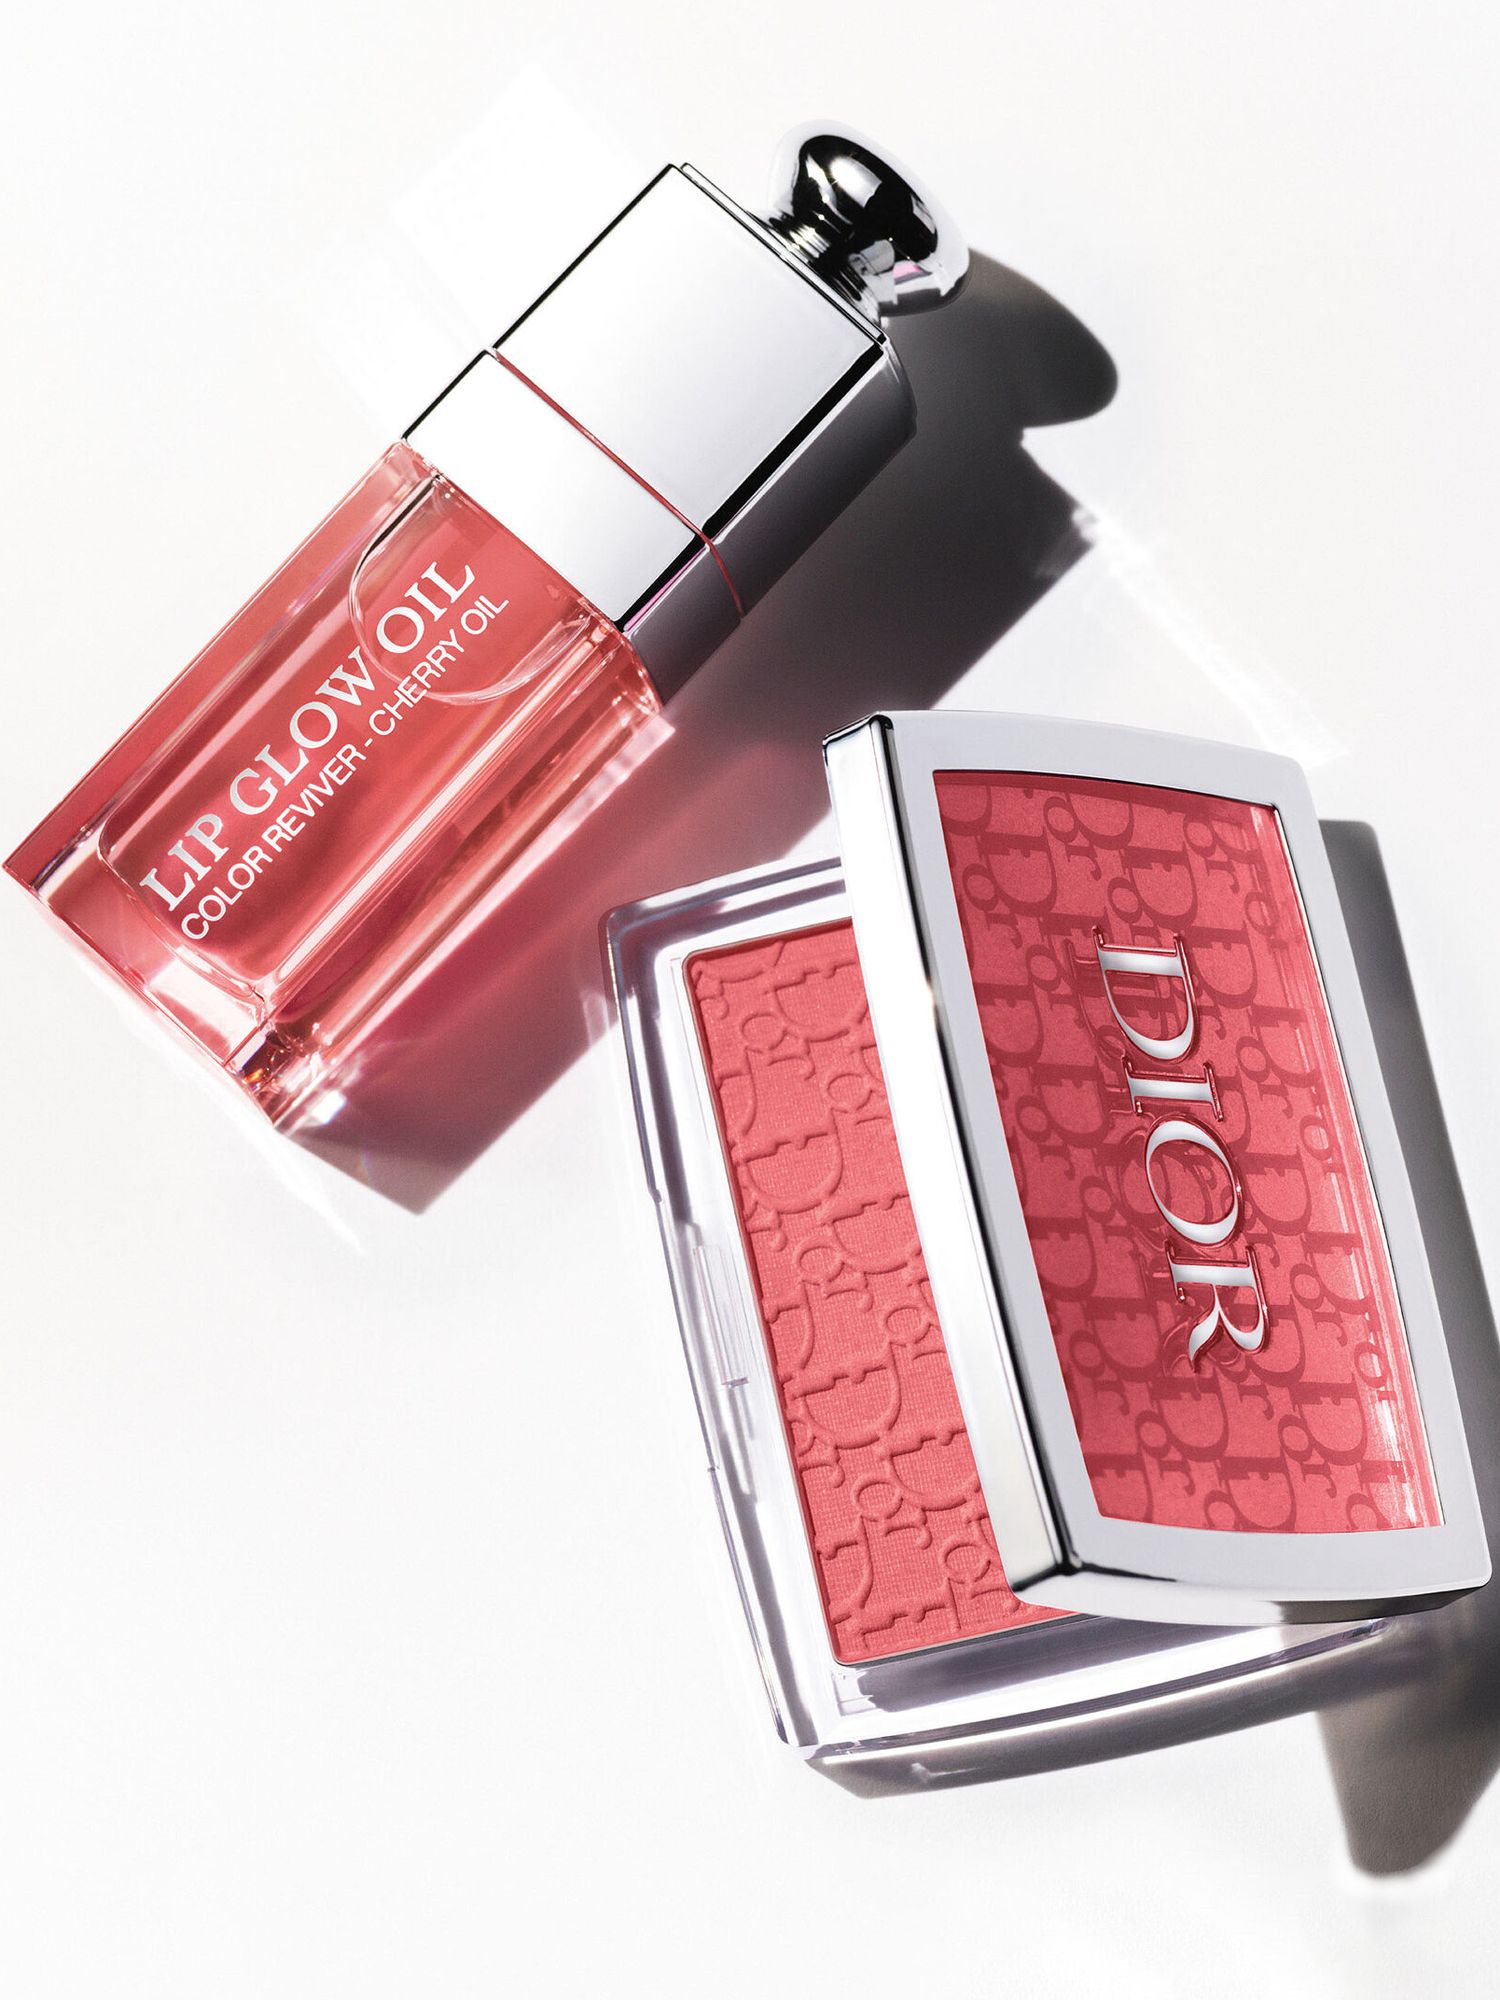 DIOR Backstage Rosy Glow, 012 Rosewood 7